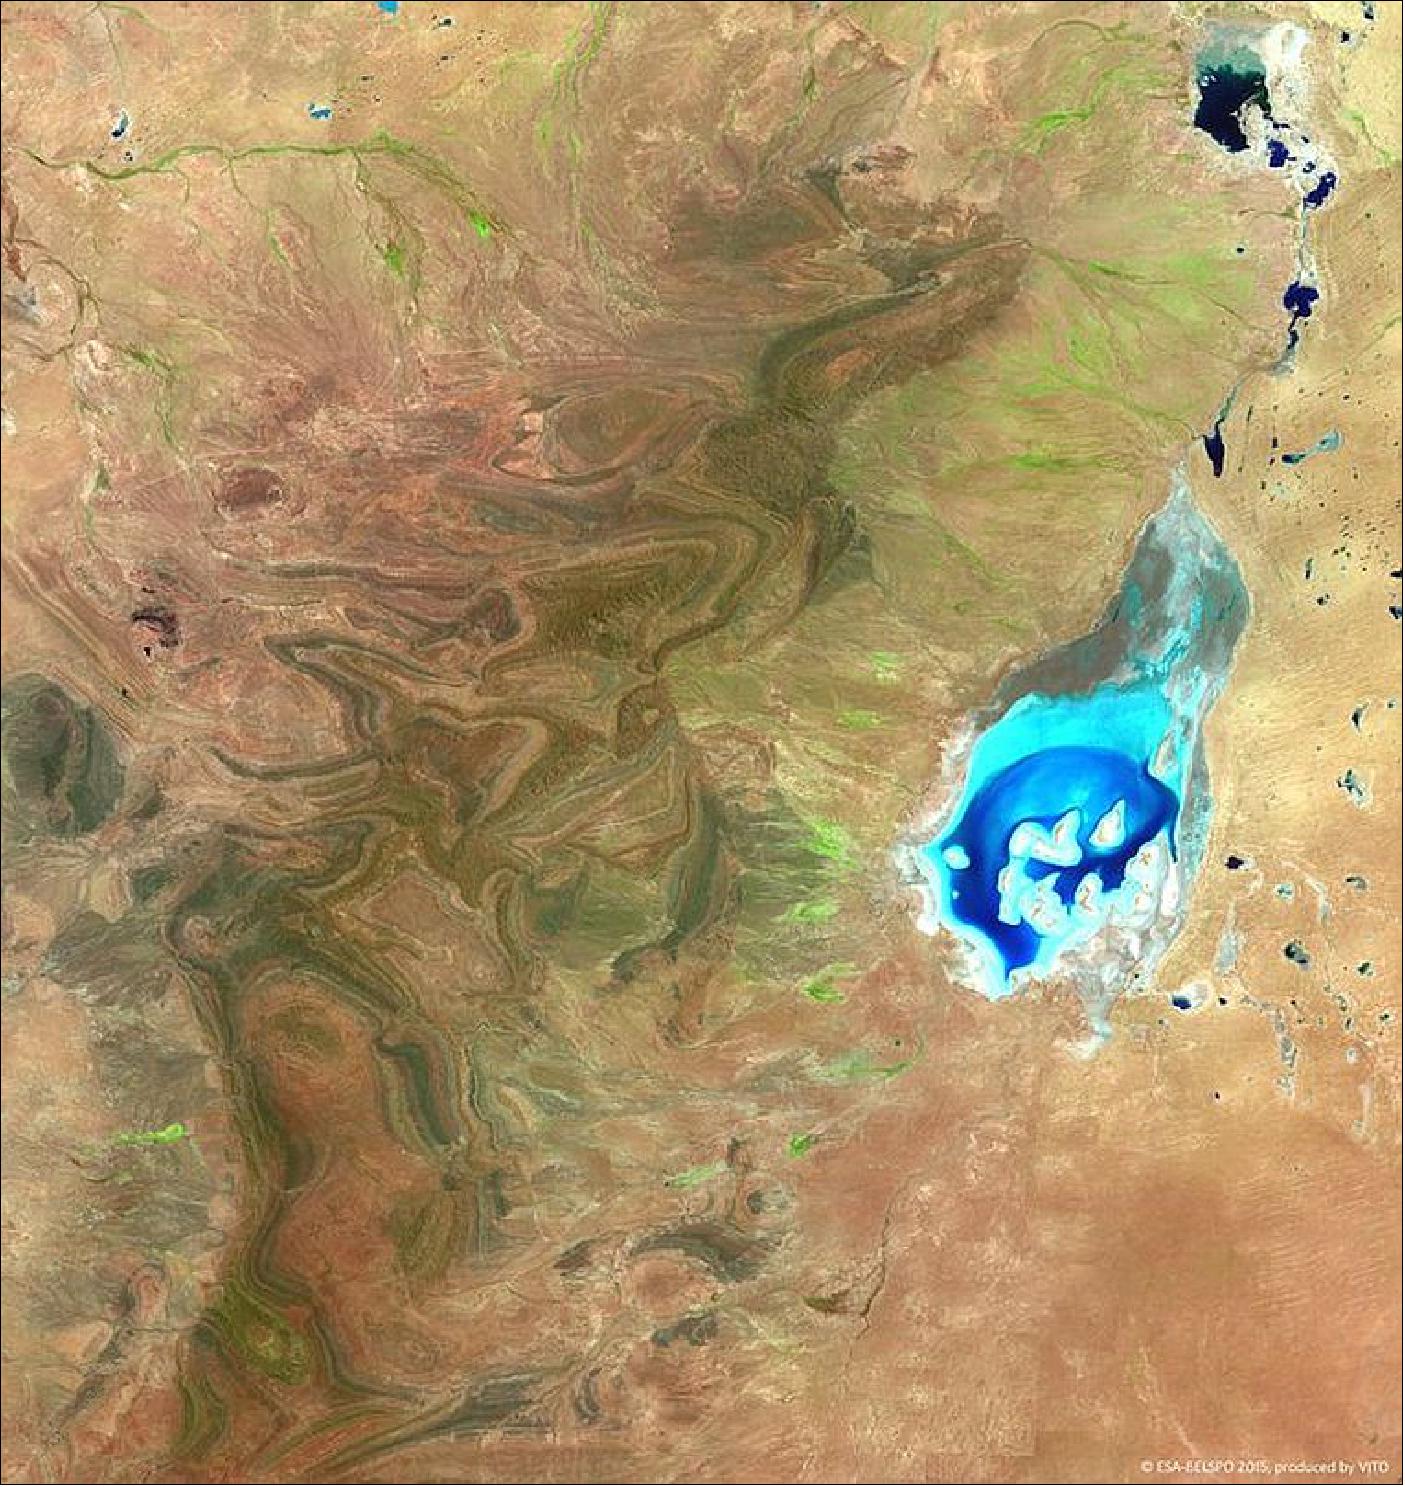 Figure 52: Lake Frome in South Australia as acquired by PROBA-V on Feb. 12, 2015 (image credit: ESA, VITO)